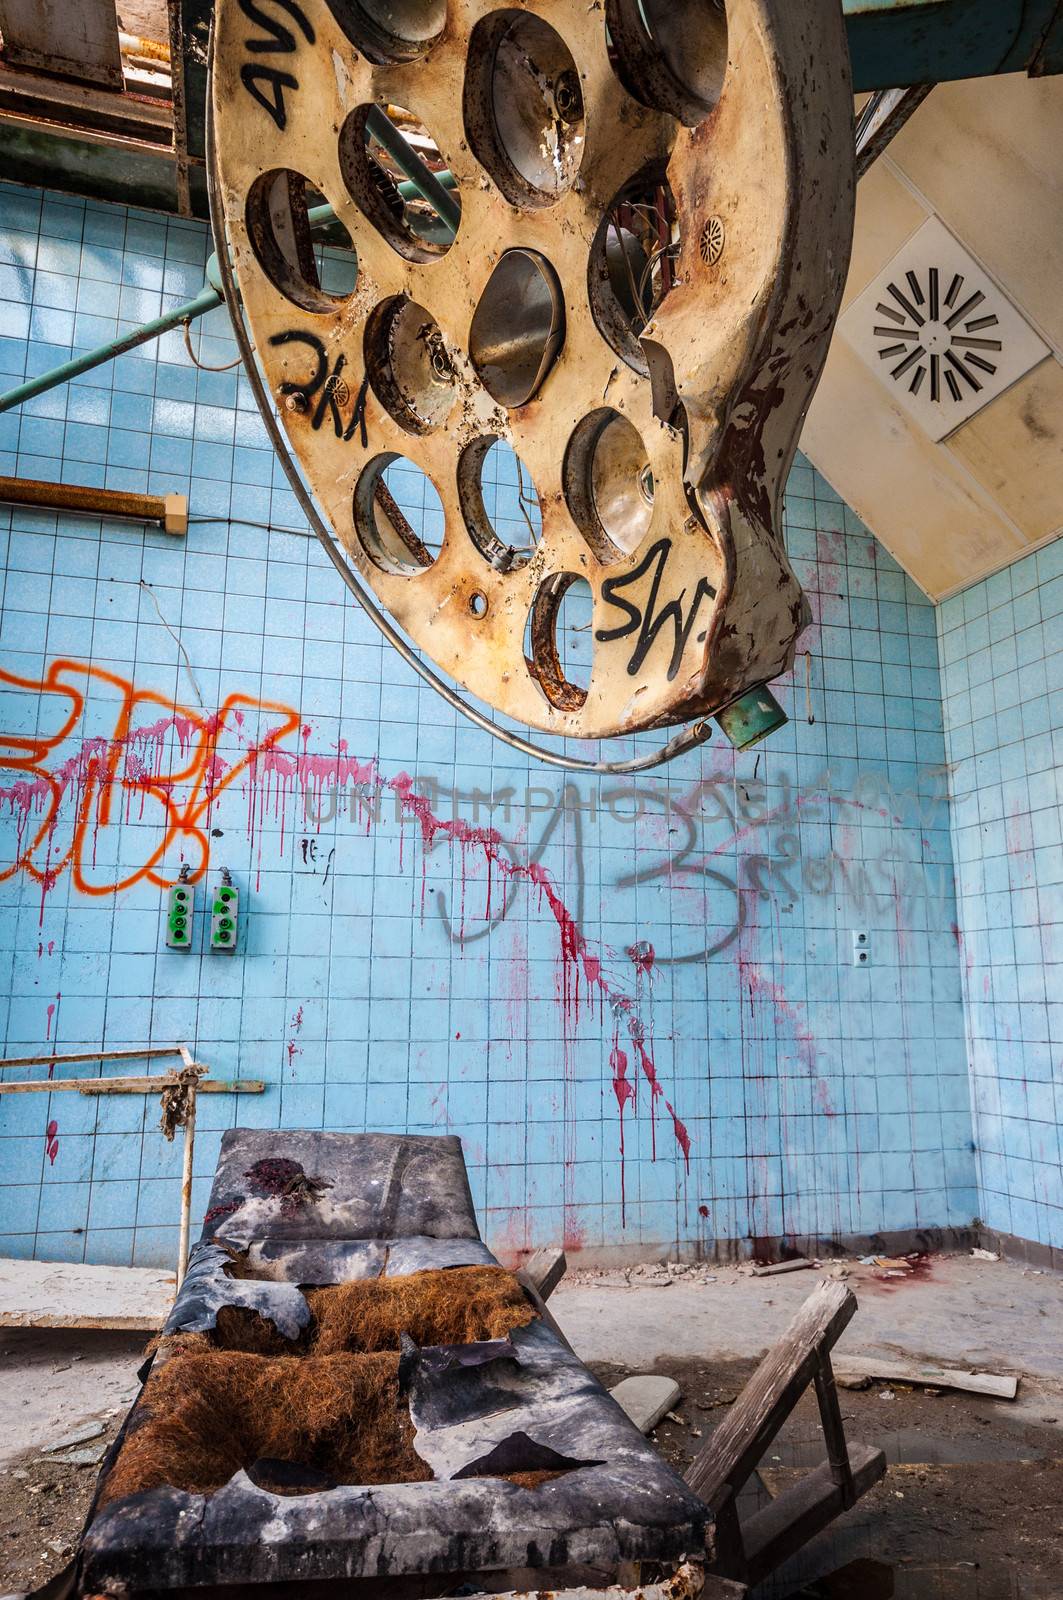 dirty operating room in an abandoned hospital